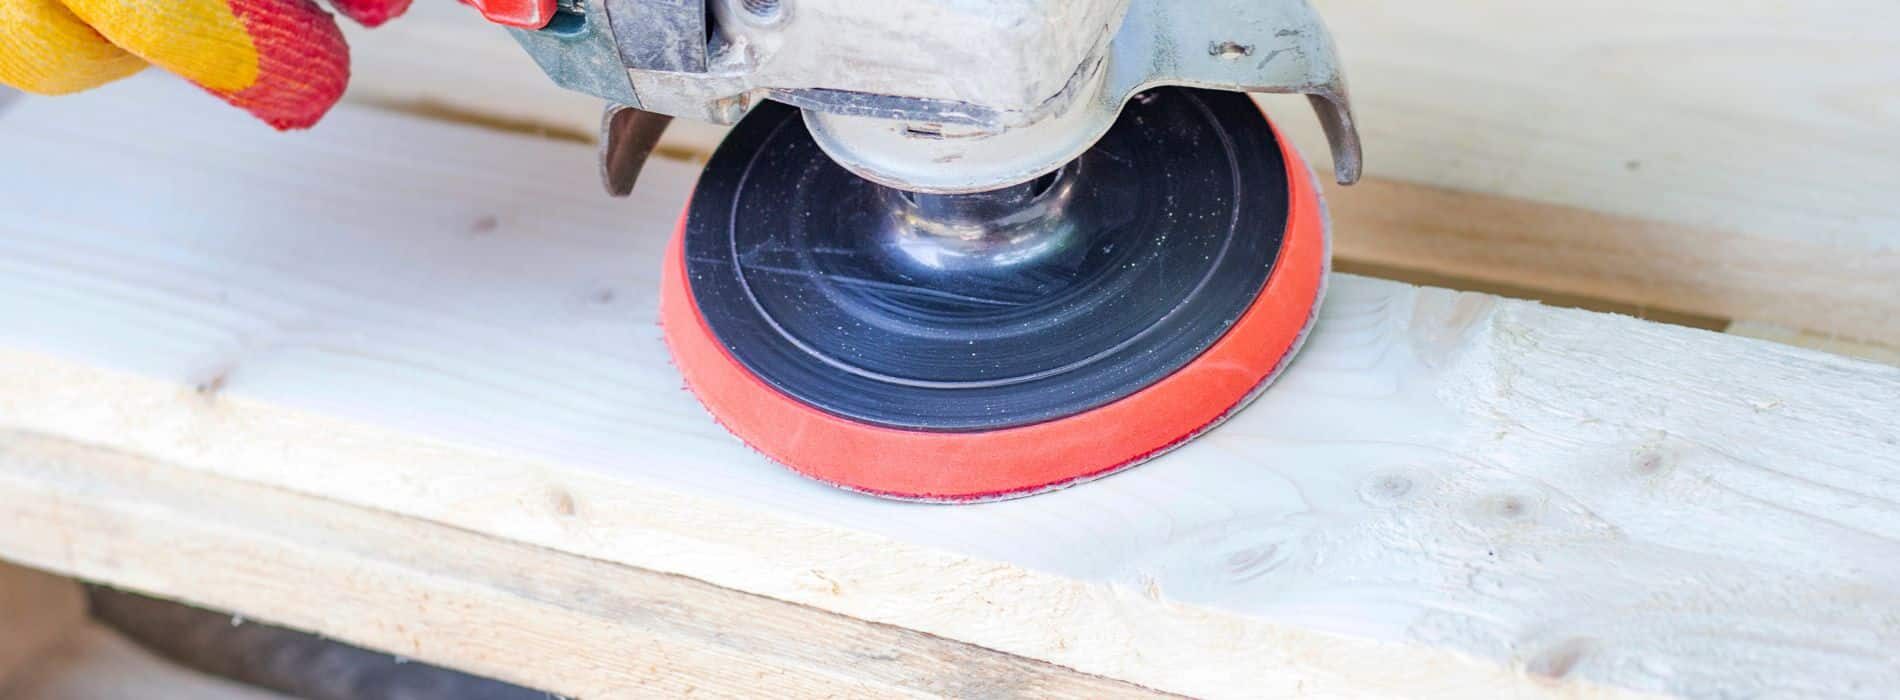 240v Orbital 125mm is used for finest sanding and ultimate results.